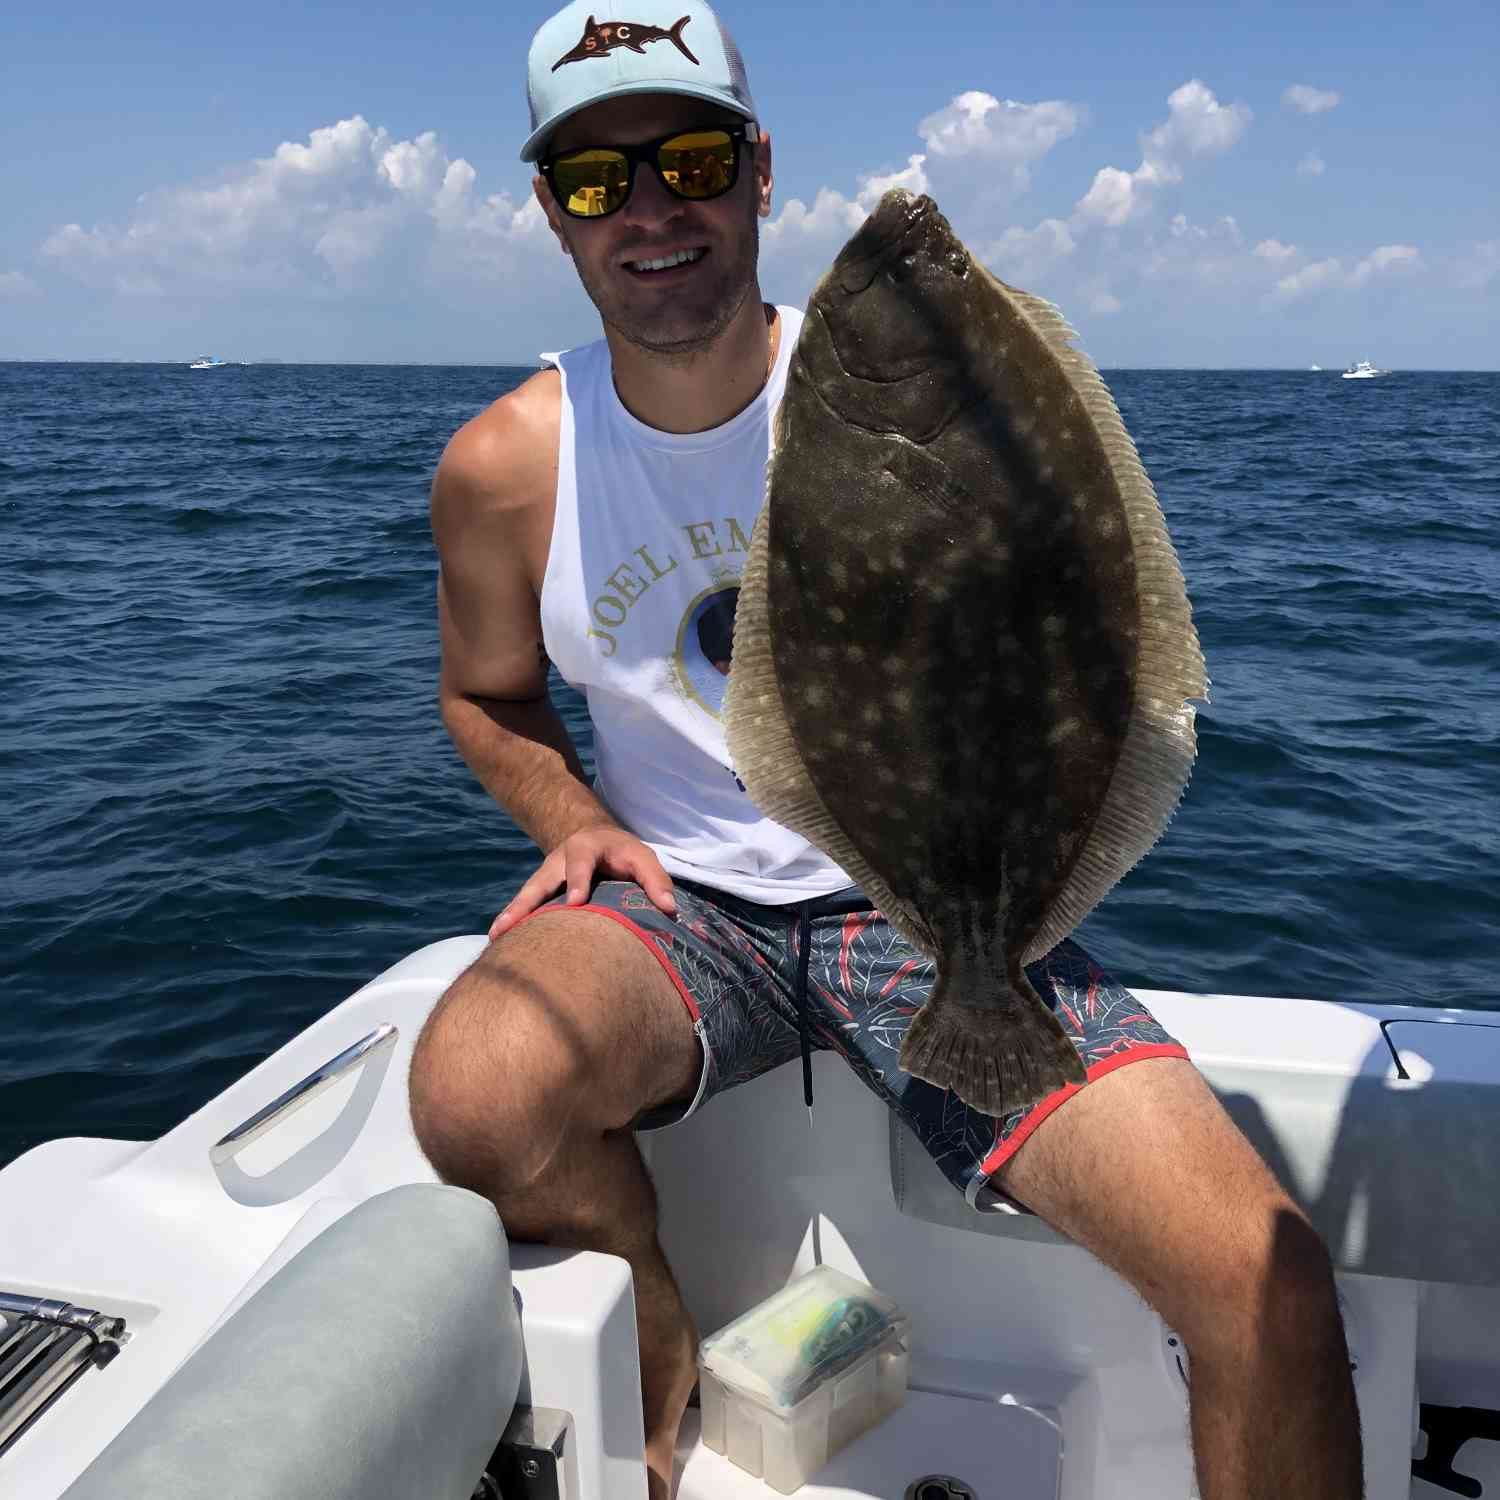 Second year having our Open 212 and finally got our first doormat flounder off of Avalon, NJ at the Townsends...